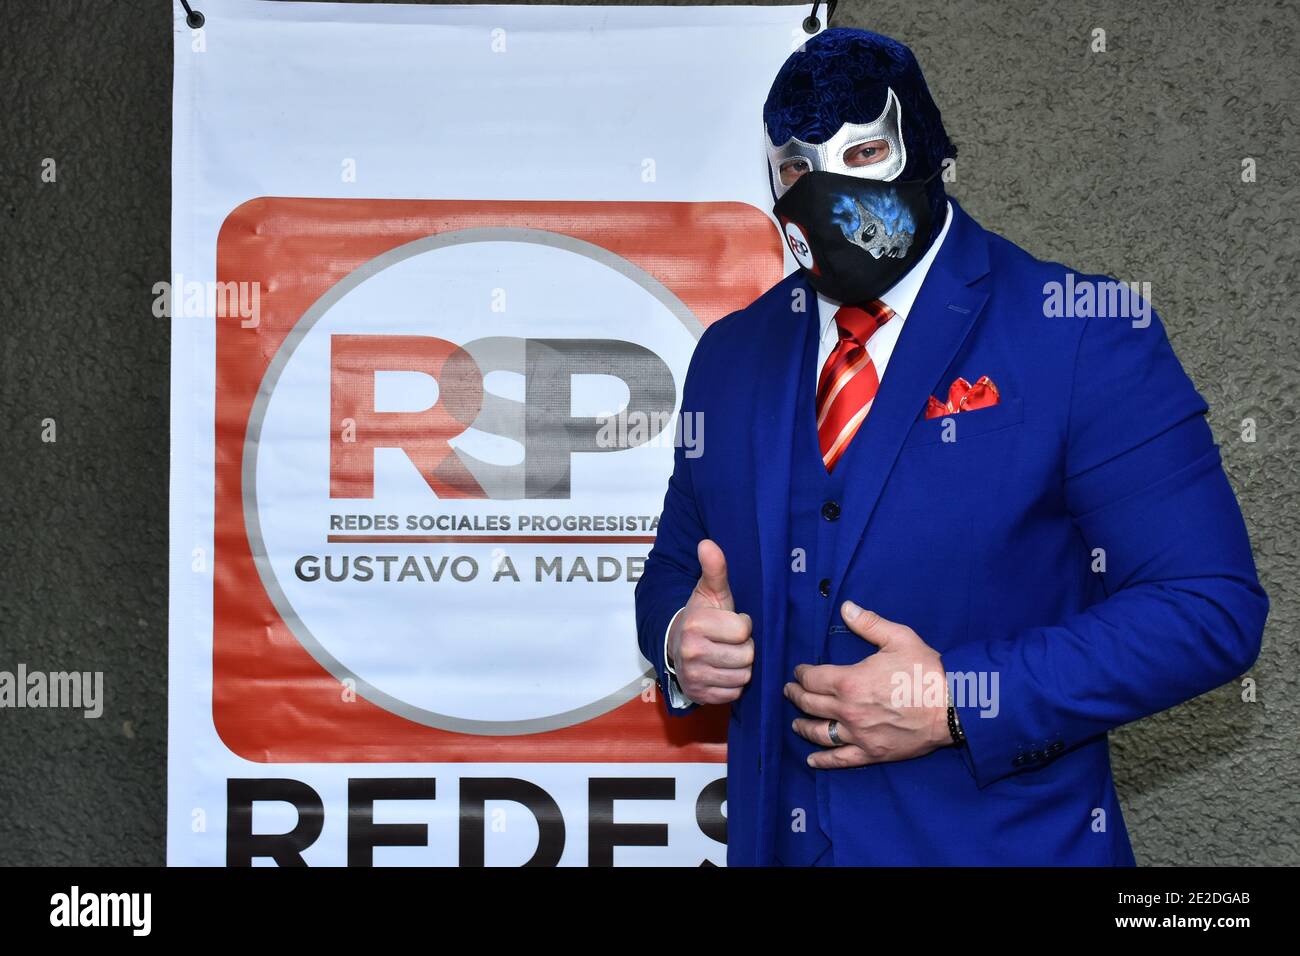 The Mexican wrestler Blue Demon Jr. Is the superhero that Mexico needs. ***  The son of the Legend Blue, Blue Demon Jr. fights in a wrestling match  after expressing concern about the